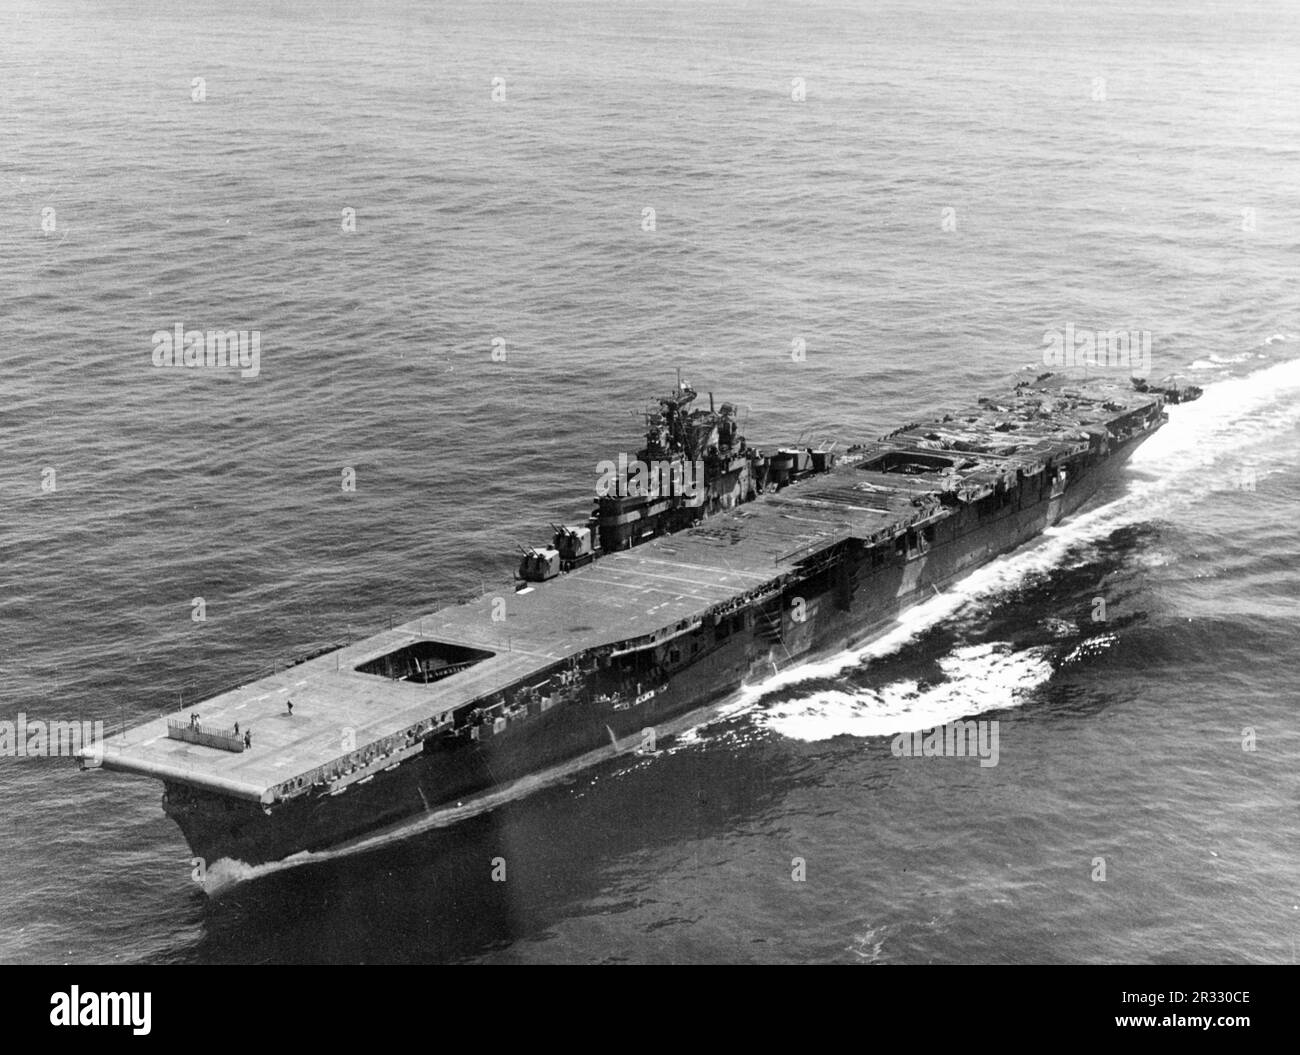 The damaged US Essex Class carrier USS Franklin (CV-13) at New York in 1945. The ship was badly damaged by two bombs on 19 March 1945.The strike caught fully fuelled and armed planes on deck and started very dangerous fires. Though heavily damaged the ship did not sink and returned to the USA for repair. The ship was decommissioned in 1947 and scrapped in 1966. In this photo the heavy damage to the flight deck and the island superstructure is clearly visible. Stock Photo